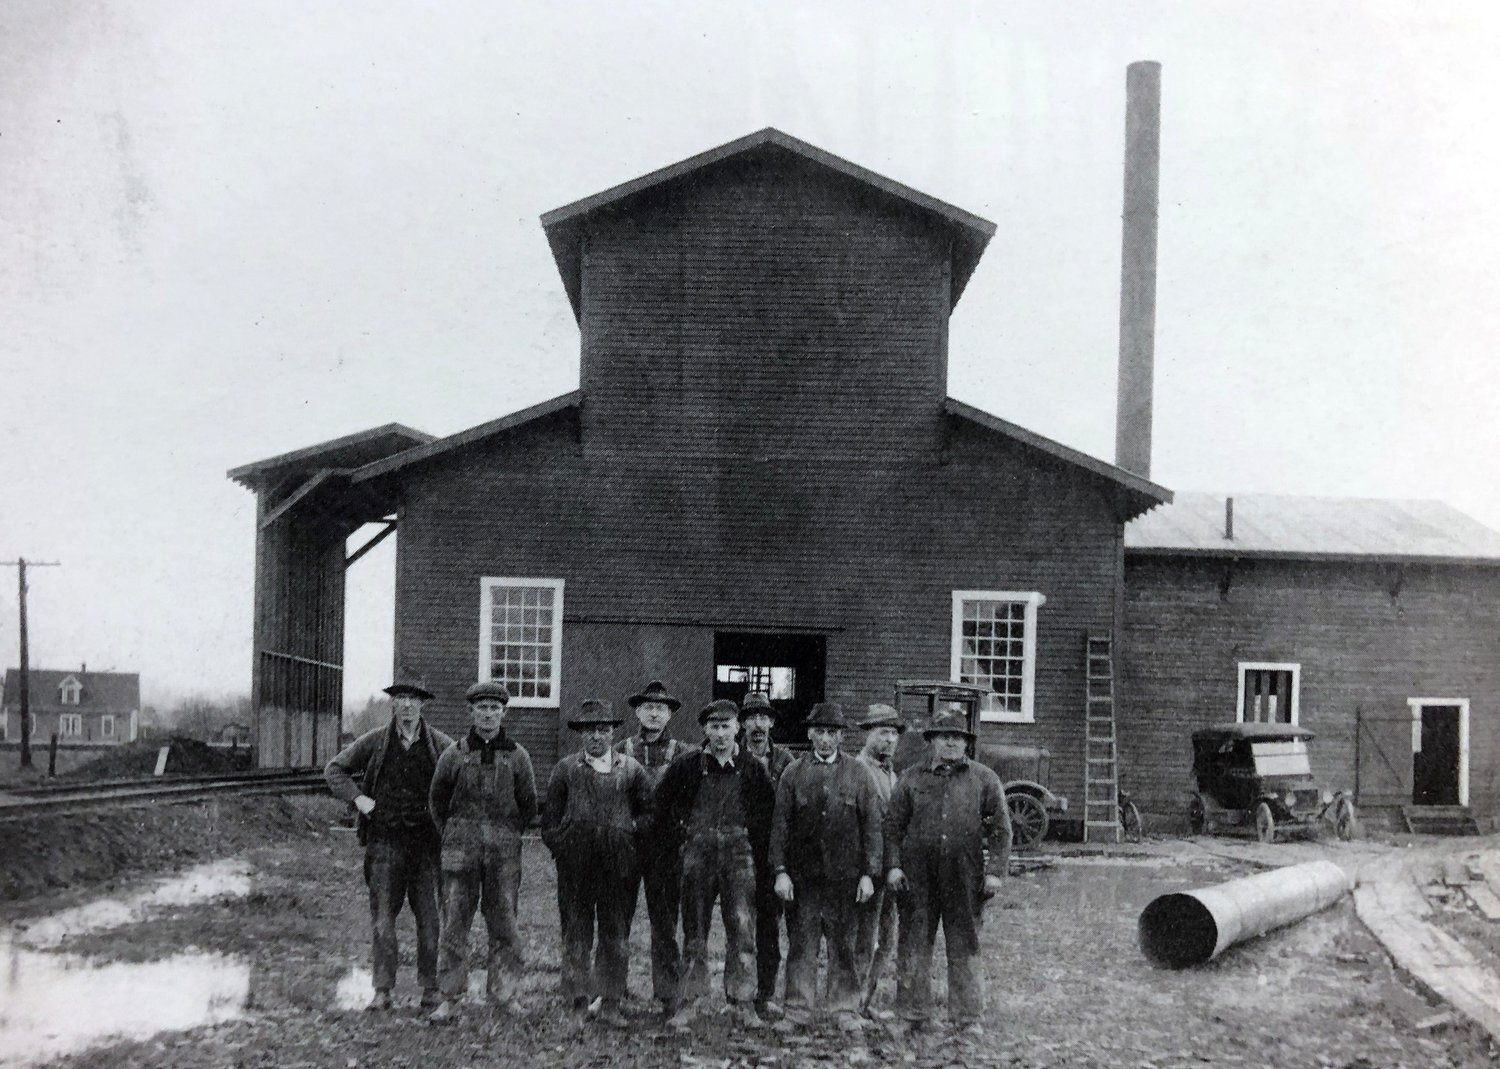 HISTORY PHOTO OF THE WEEK: This 1920 photo is of a Centralia plant that manufactured briquettes from coal dust using a petroleum-based binder. It was located in the vicinity of what is now the 1100 block of J and K streets in Centralia. The plant was in operation during the early 1920s and was run by a man known as "King" Kenny and his brother. The third man from the left in this photo is Sutton Nunn. Nunn was born in England in the town of Sutton and worked at the time at the plant. He came to Centralia by way of Canada and married Elsie Wright Nunn. The couple had three children they raised in Centralia. Nunn descendants remain in the area. This photo and information was originally submitted by Jim Nunn, grandson of Sutton Nunn, for The Chronicle’s Our Hometowns books.